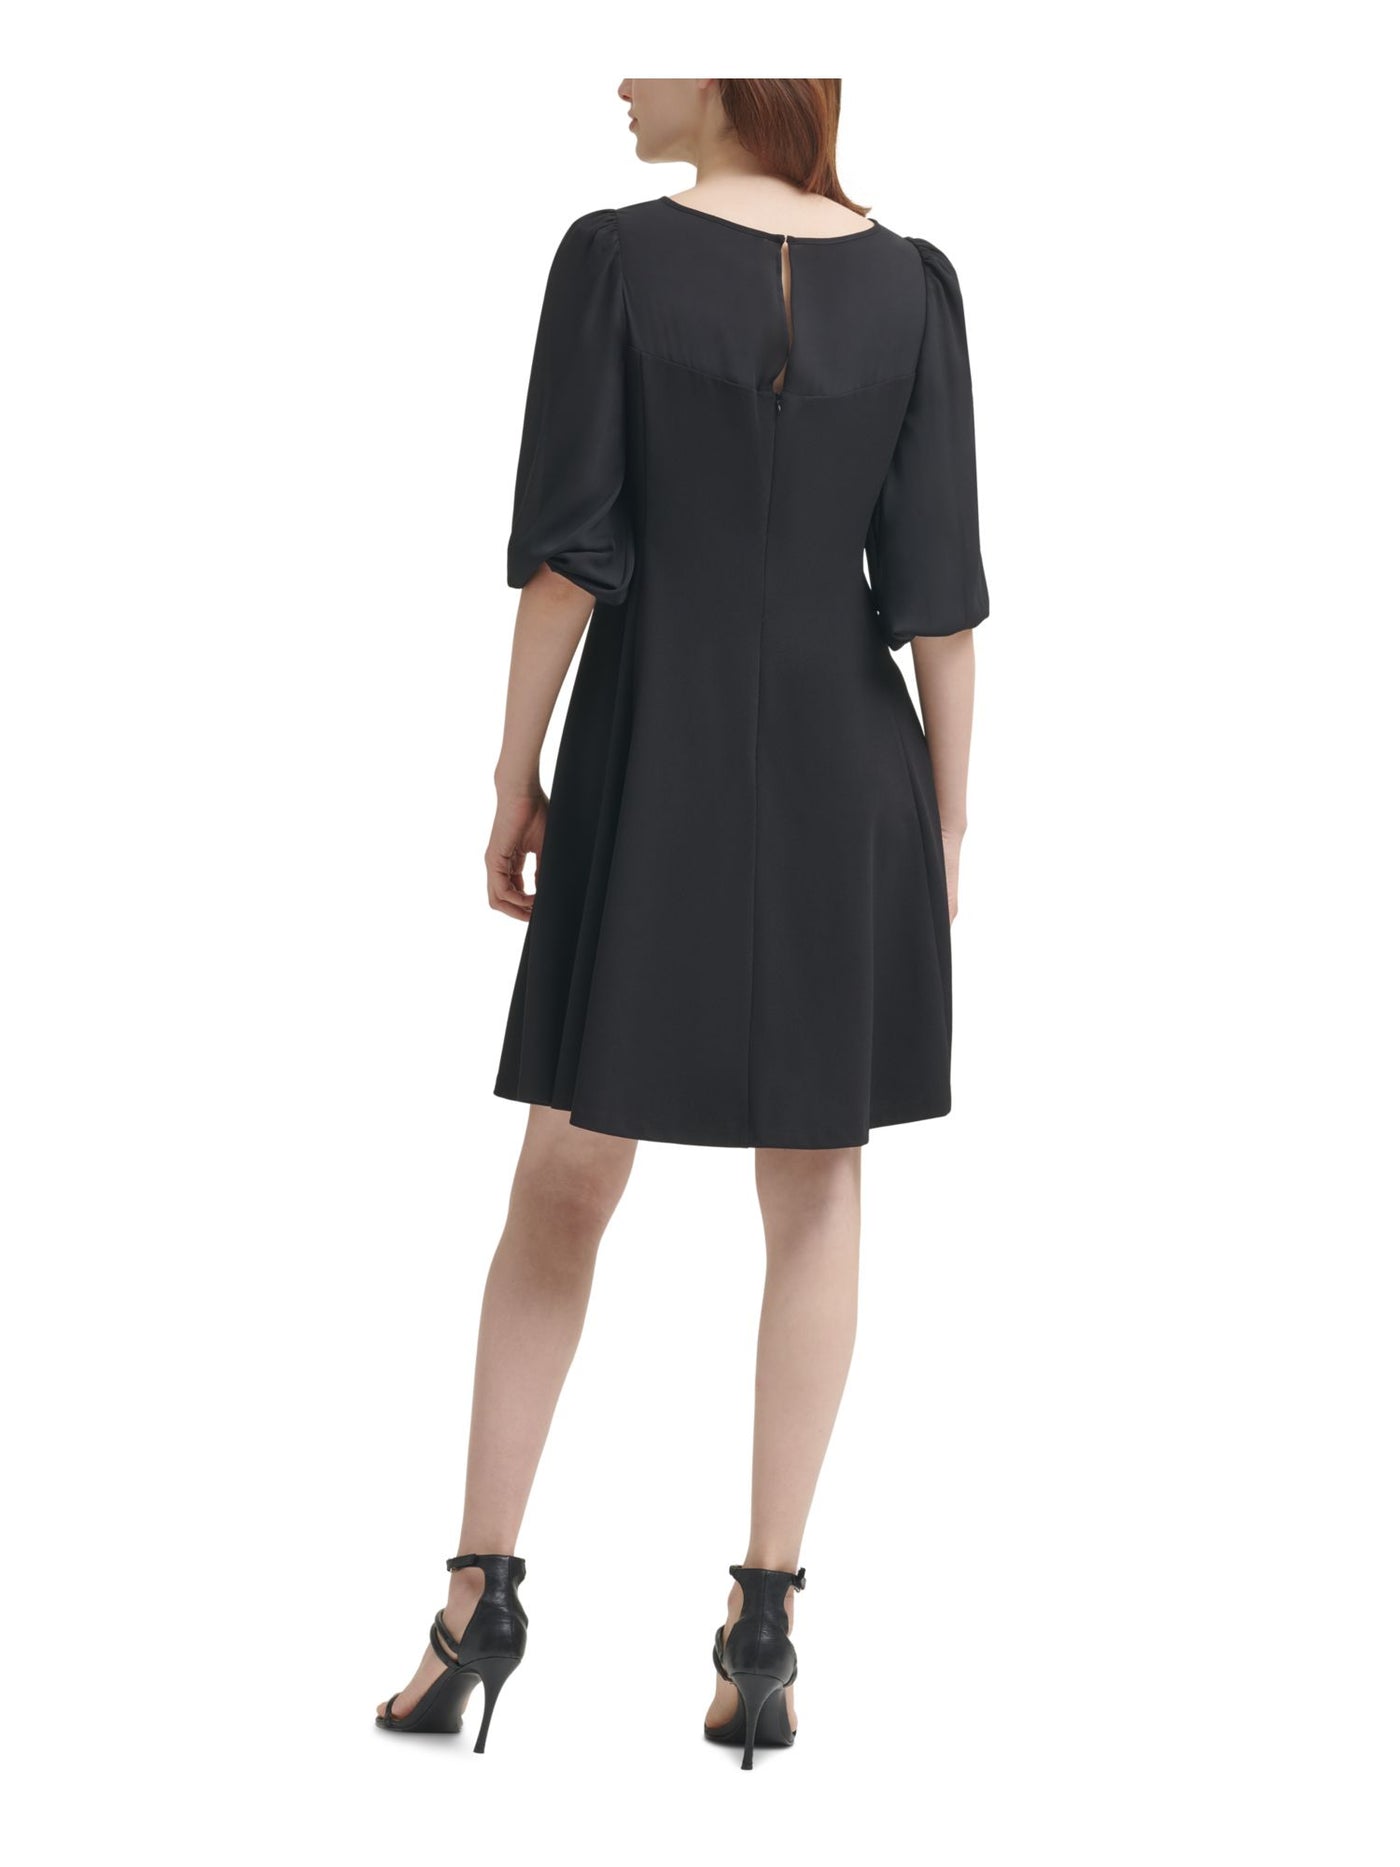 DKNY Womens Black Zippered Sheer Keyhole Back Unlined Pouf Sleeve Round Neck Above The Knee Cocktail Fit + Flare Dress 8